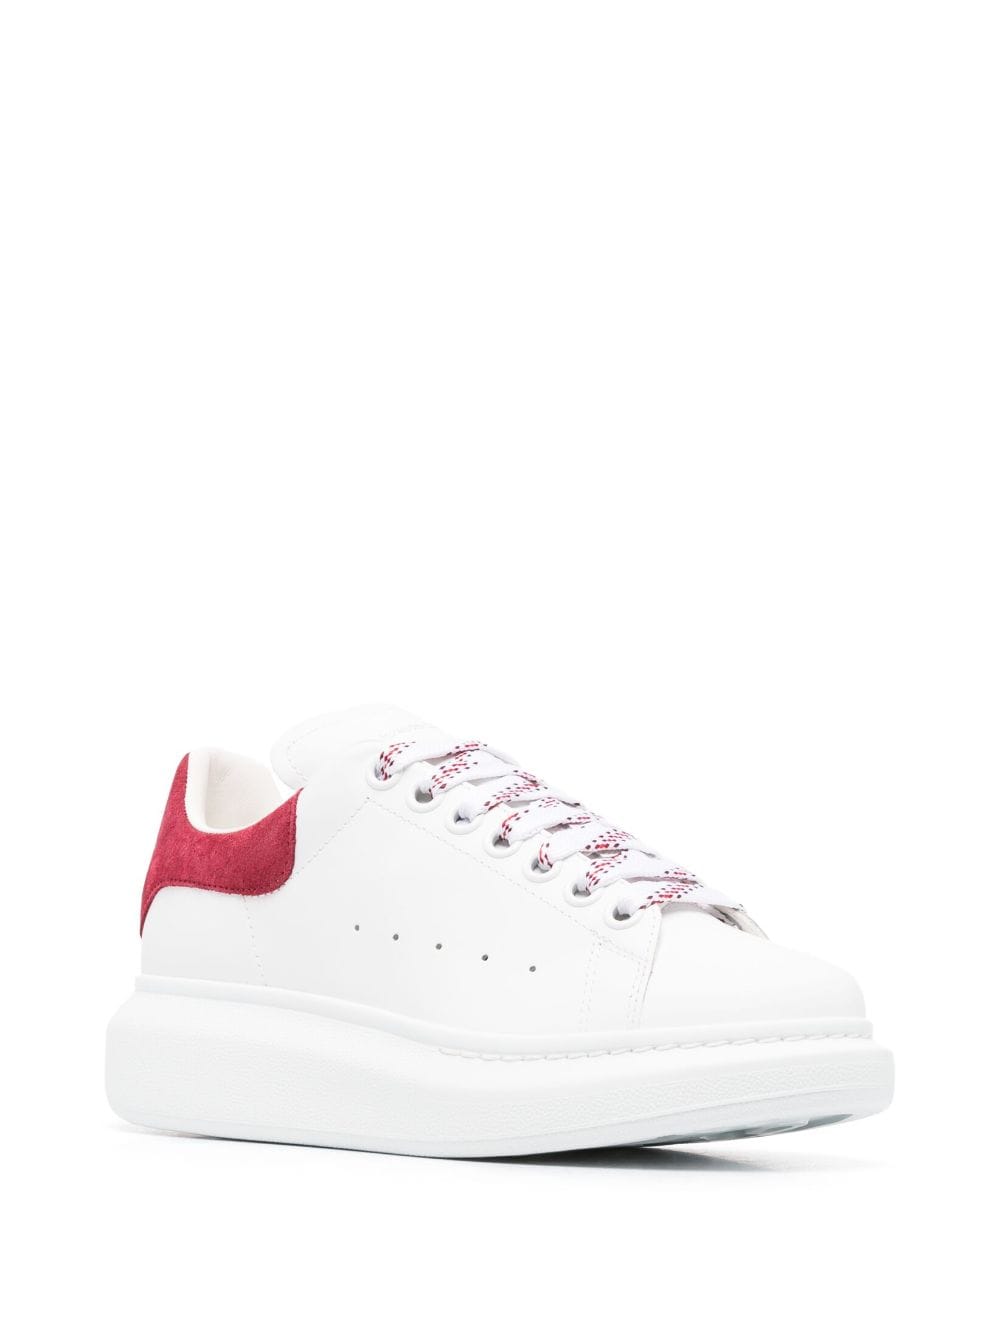 Alexander Mcqueen Lace-up Flatform Sneakers In White | ModeSens